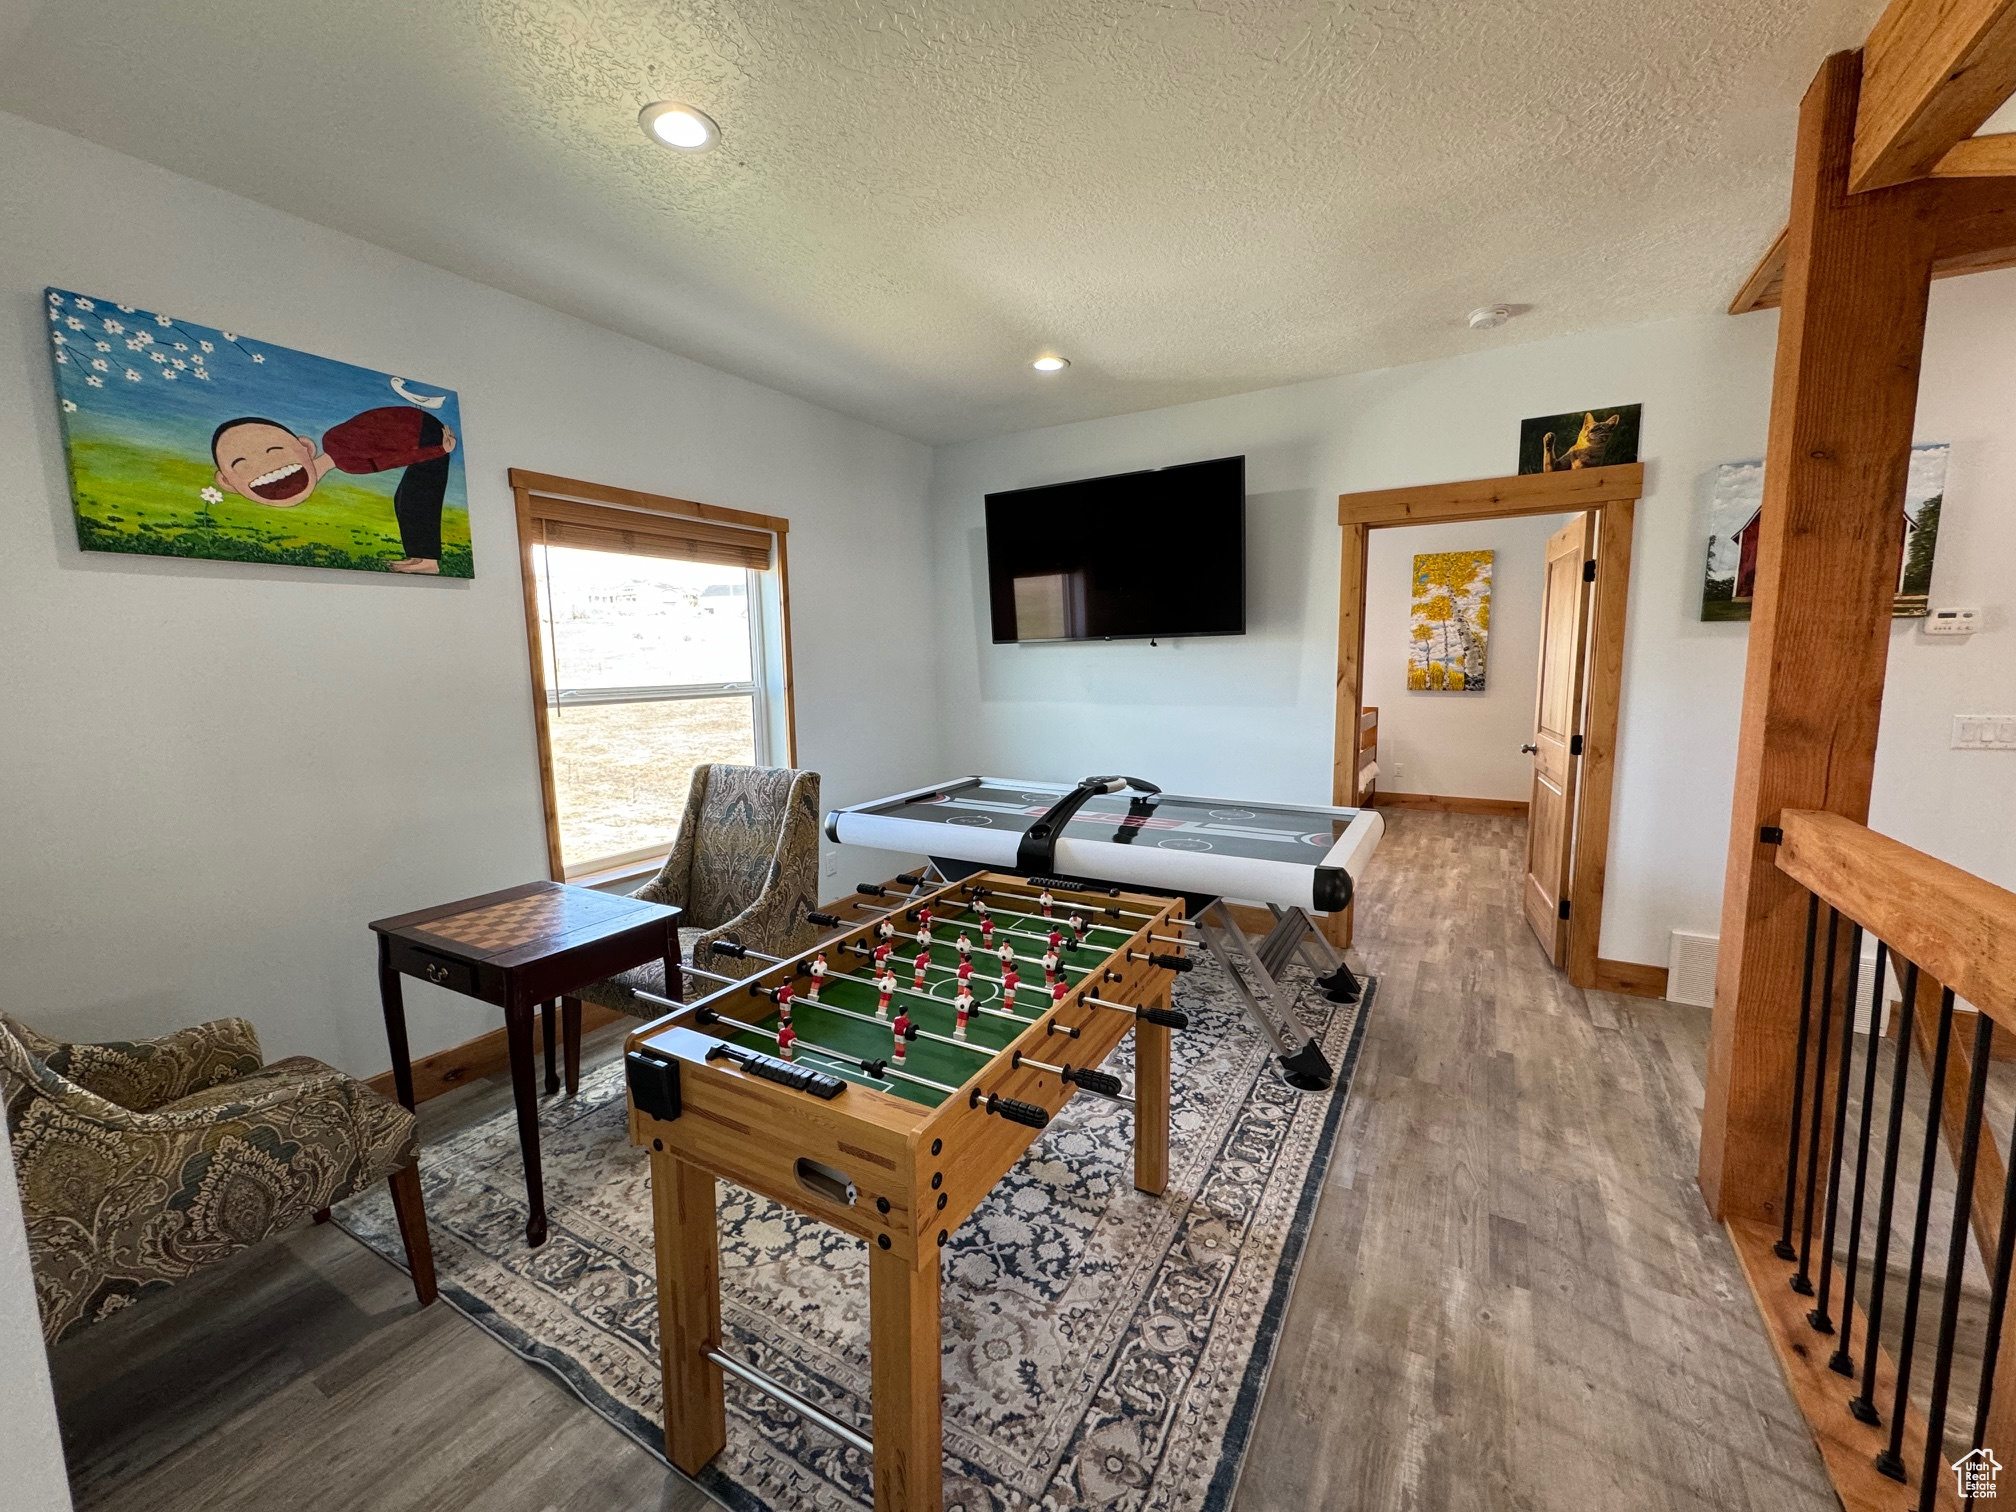 Game/TV room with LVP flooring